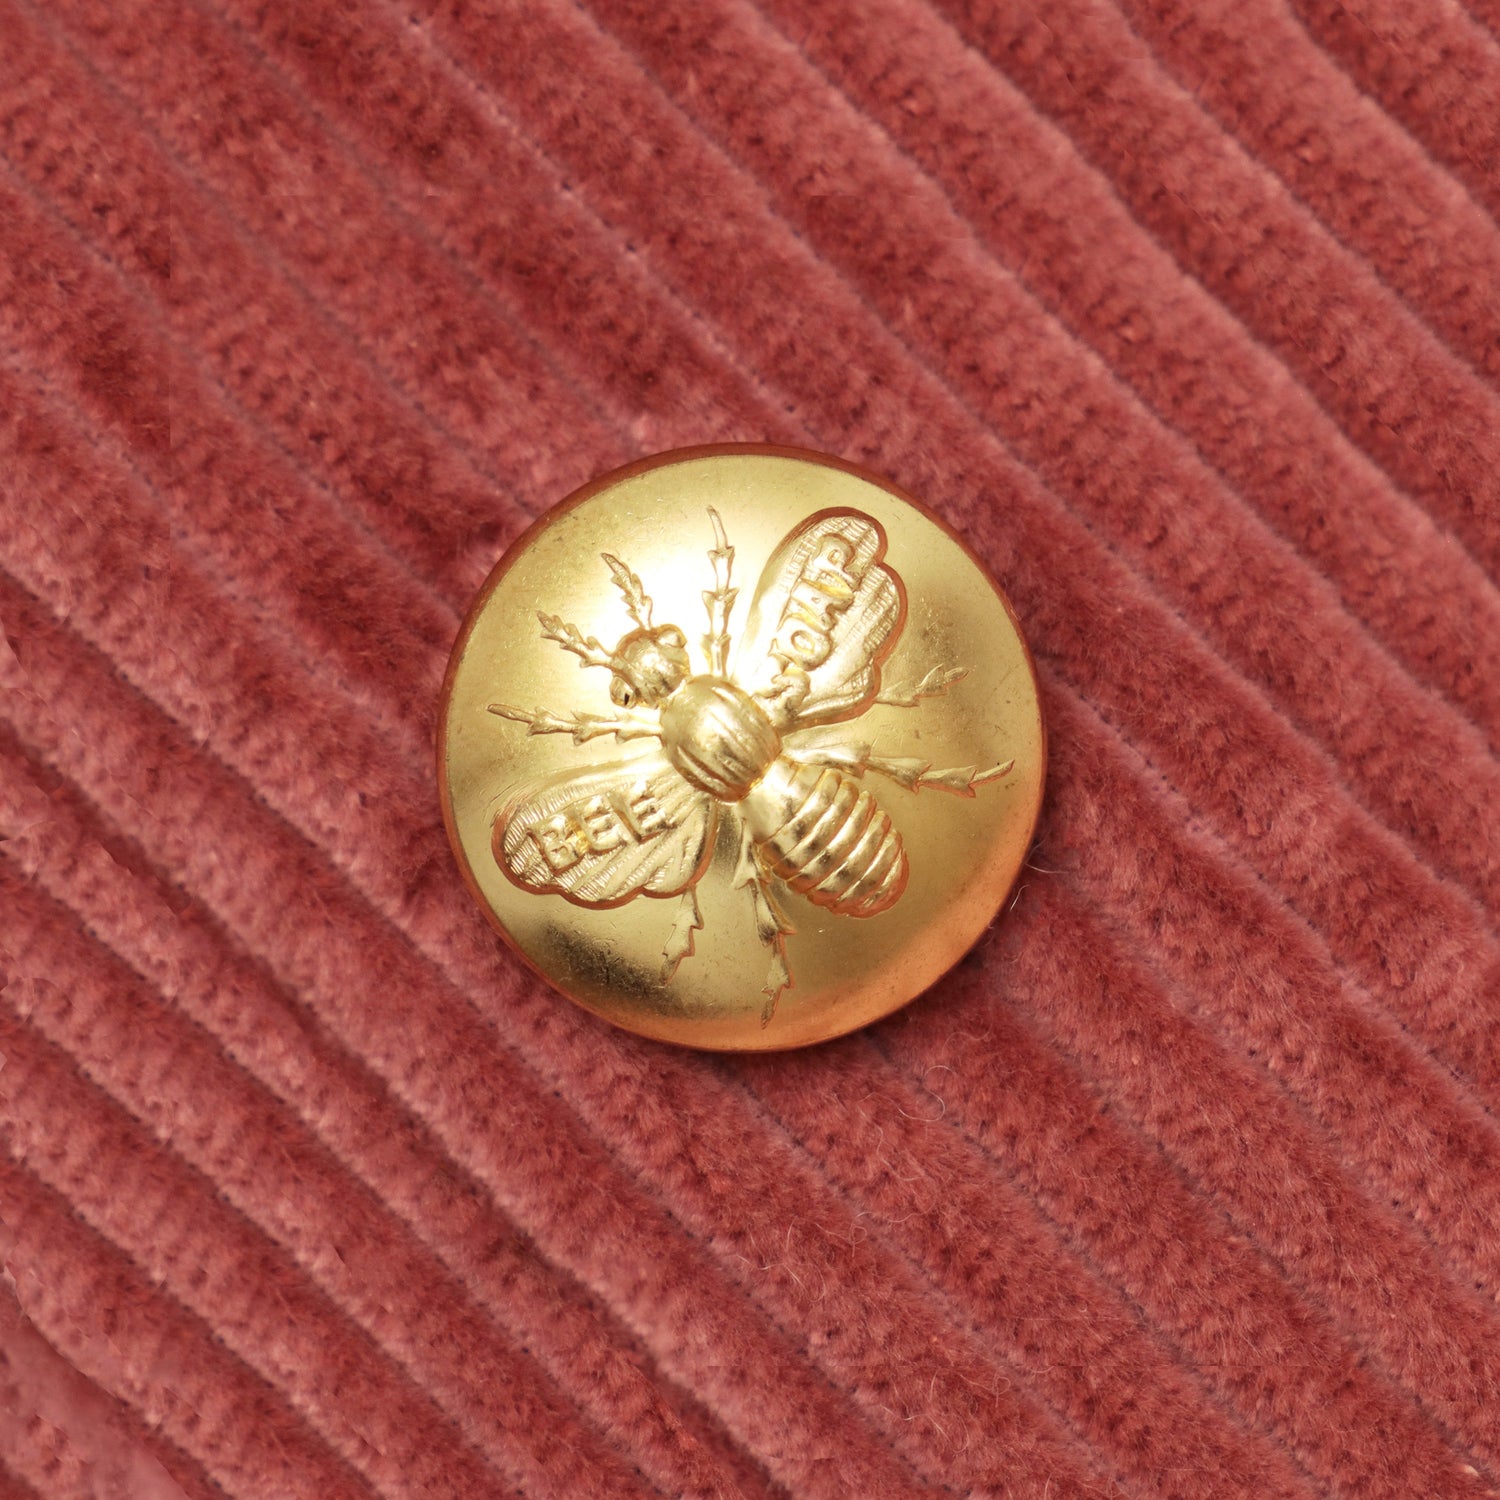 Brass button with a bee design on it.